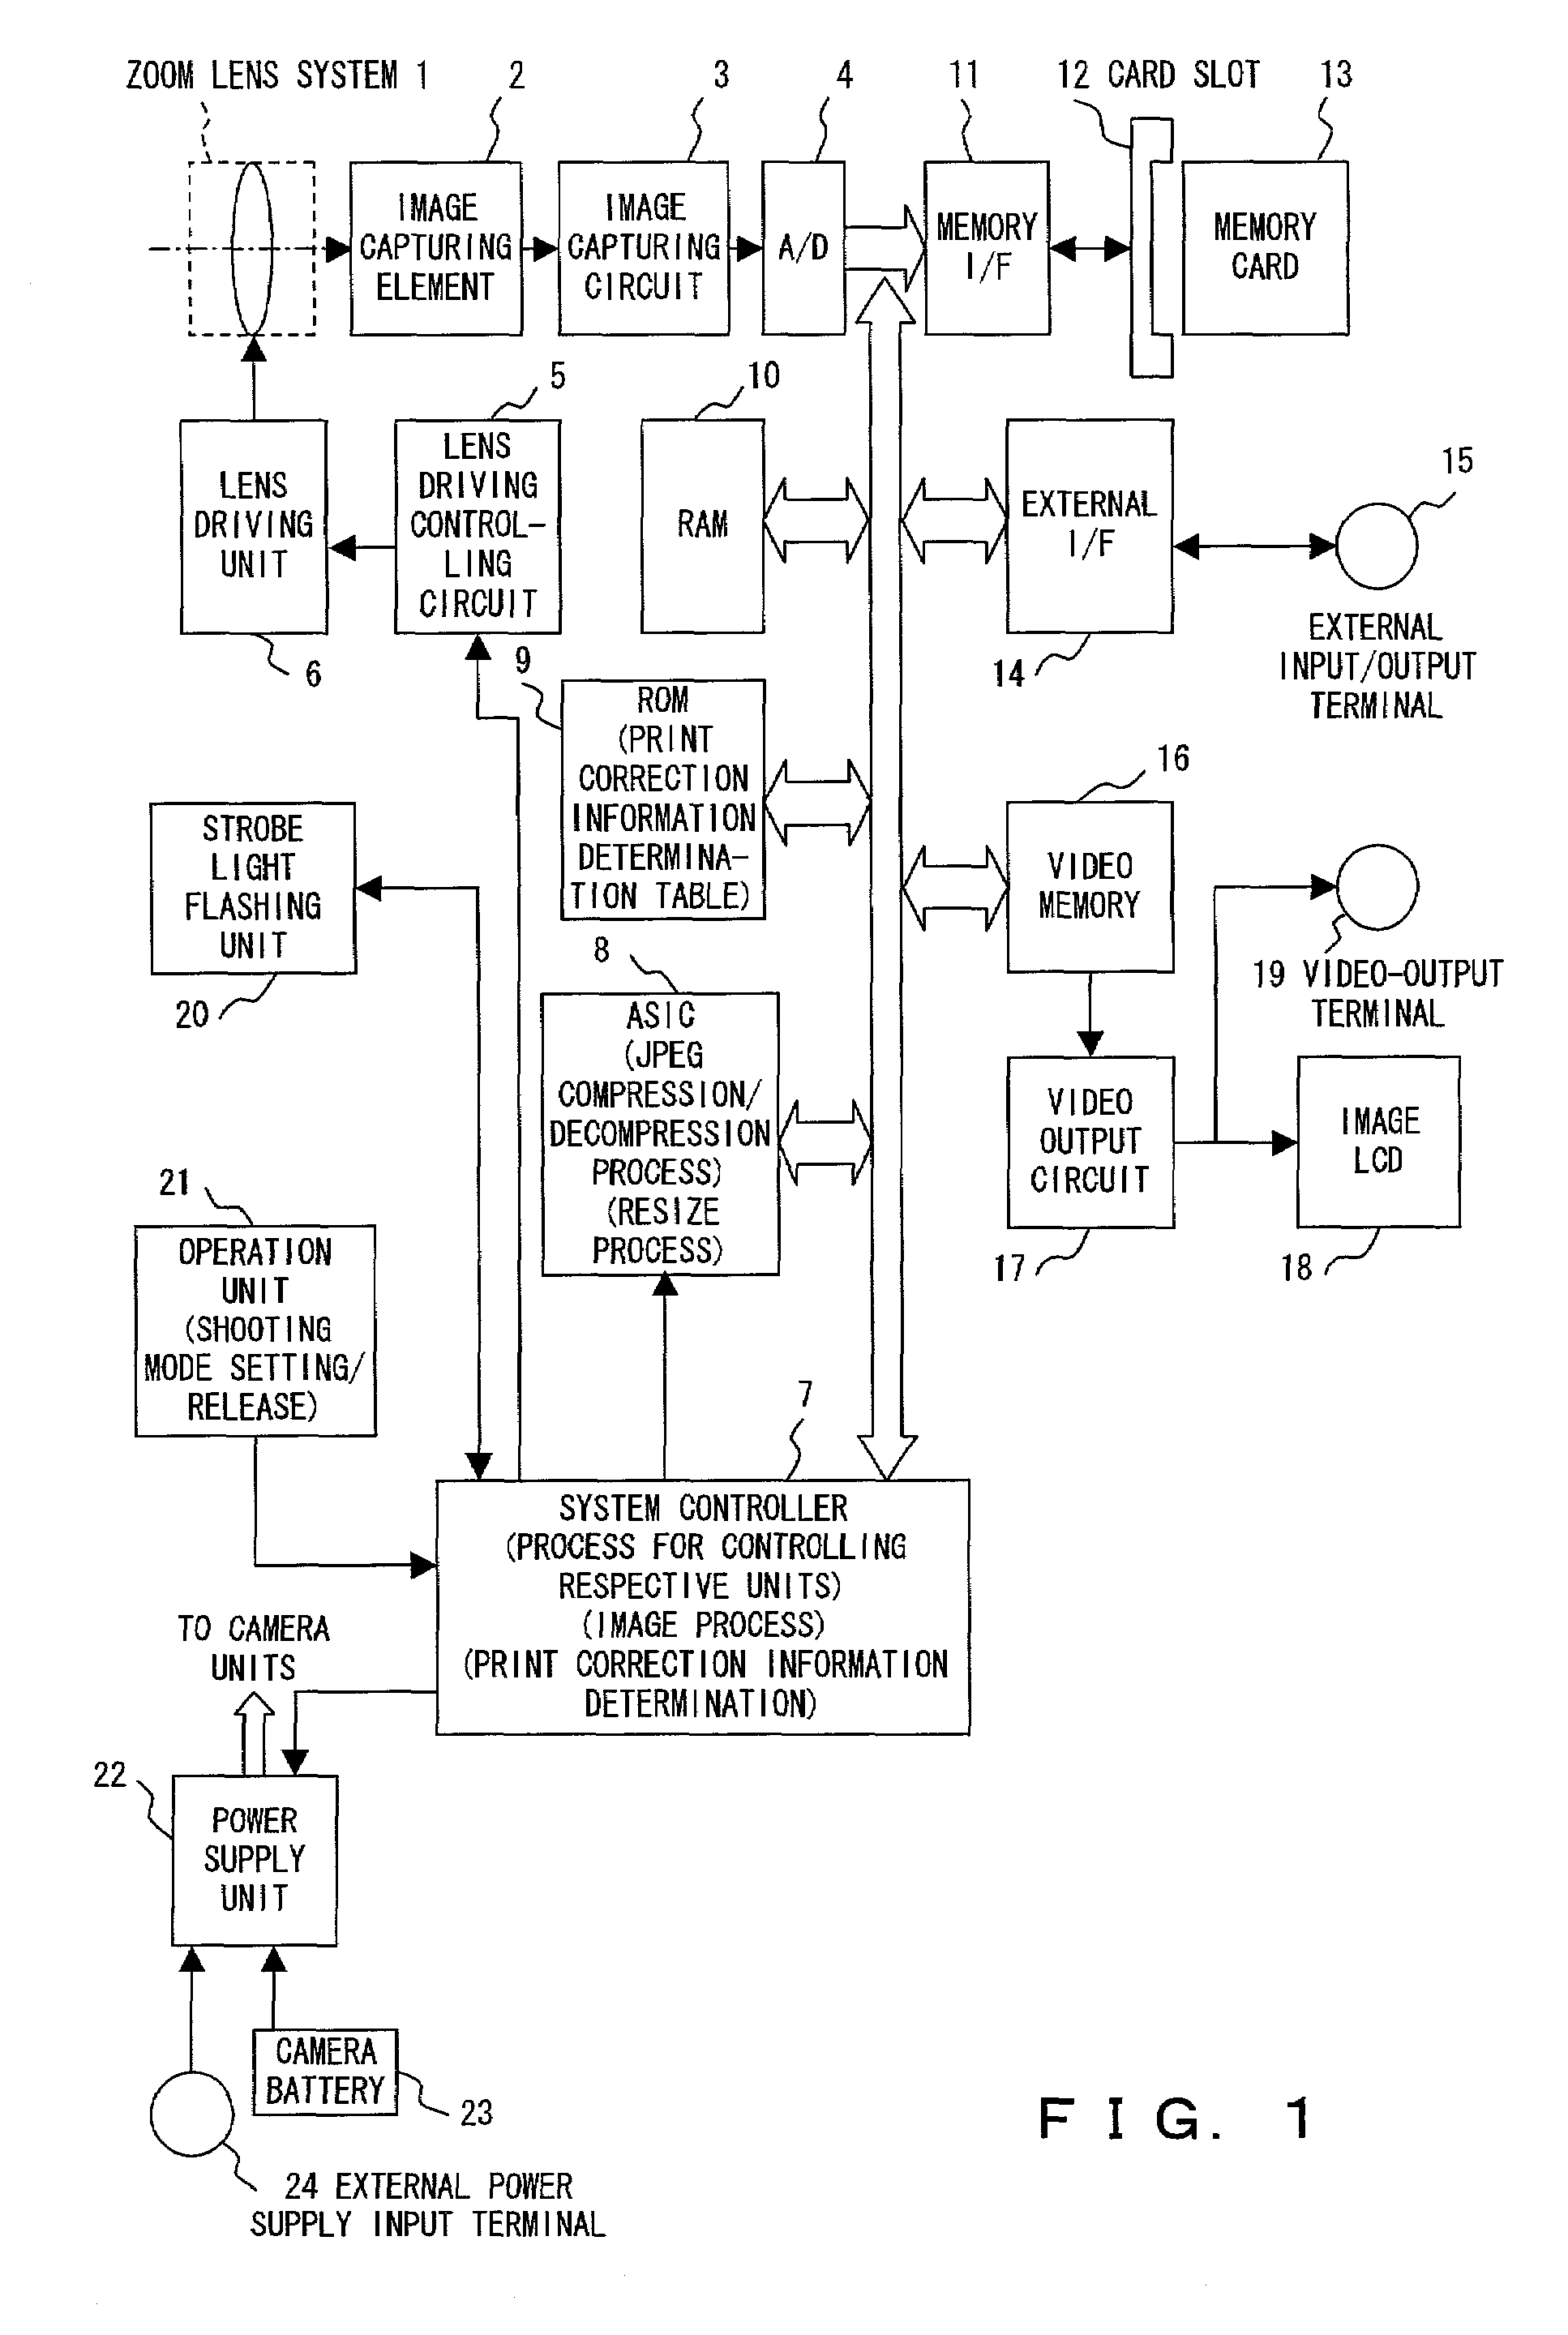 Image capturing device using correction information for preventing at least a part of correction process from being performed when image data is corrected at an external device